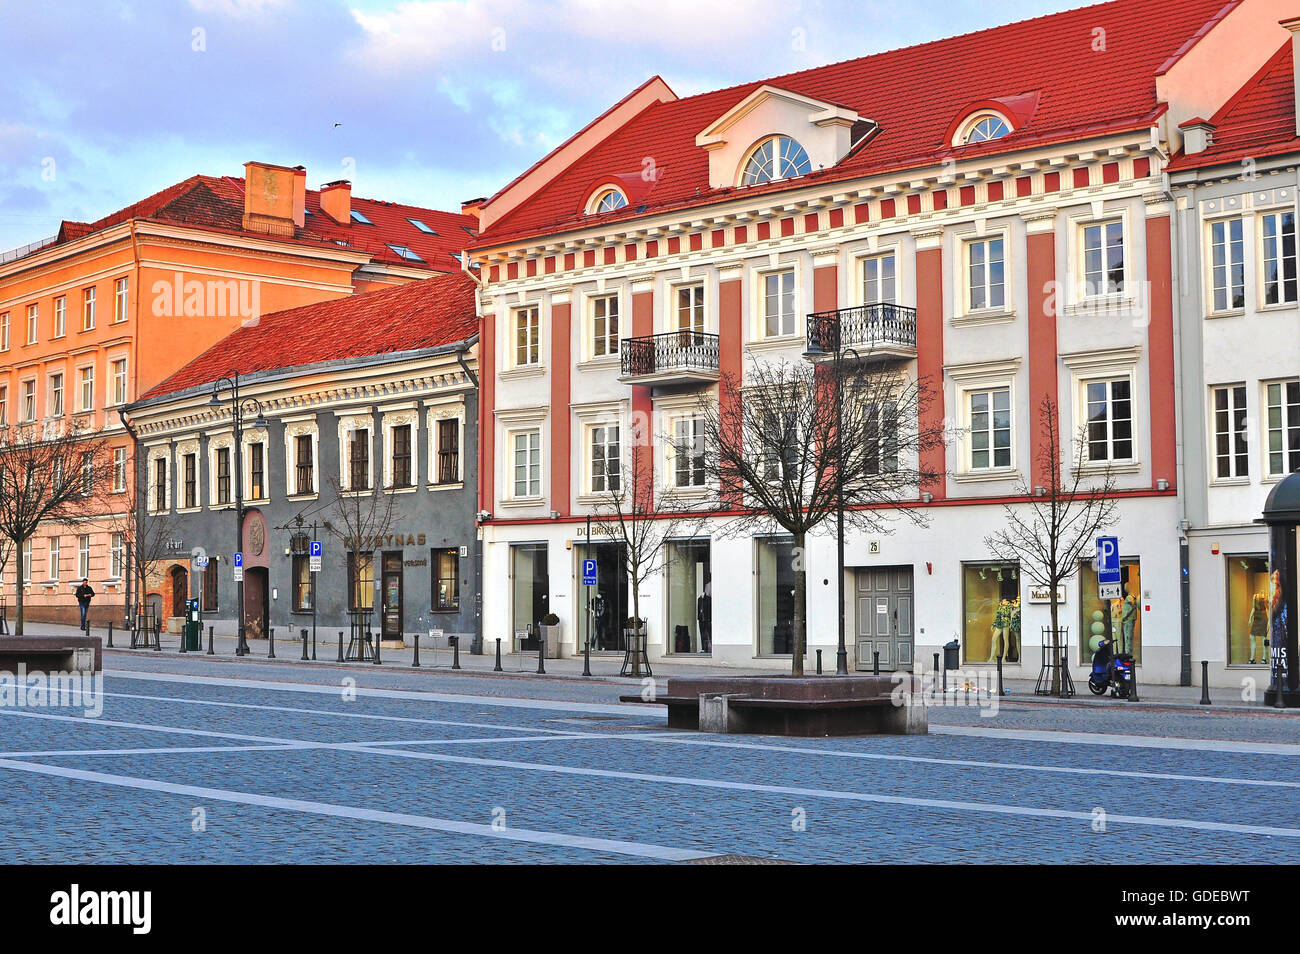 VILNIUS, LITHUANIA - APRIL 12: View of a street in Vilnius old town on April 12, 2015. Stock Photo